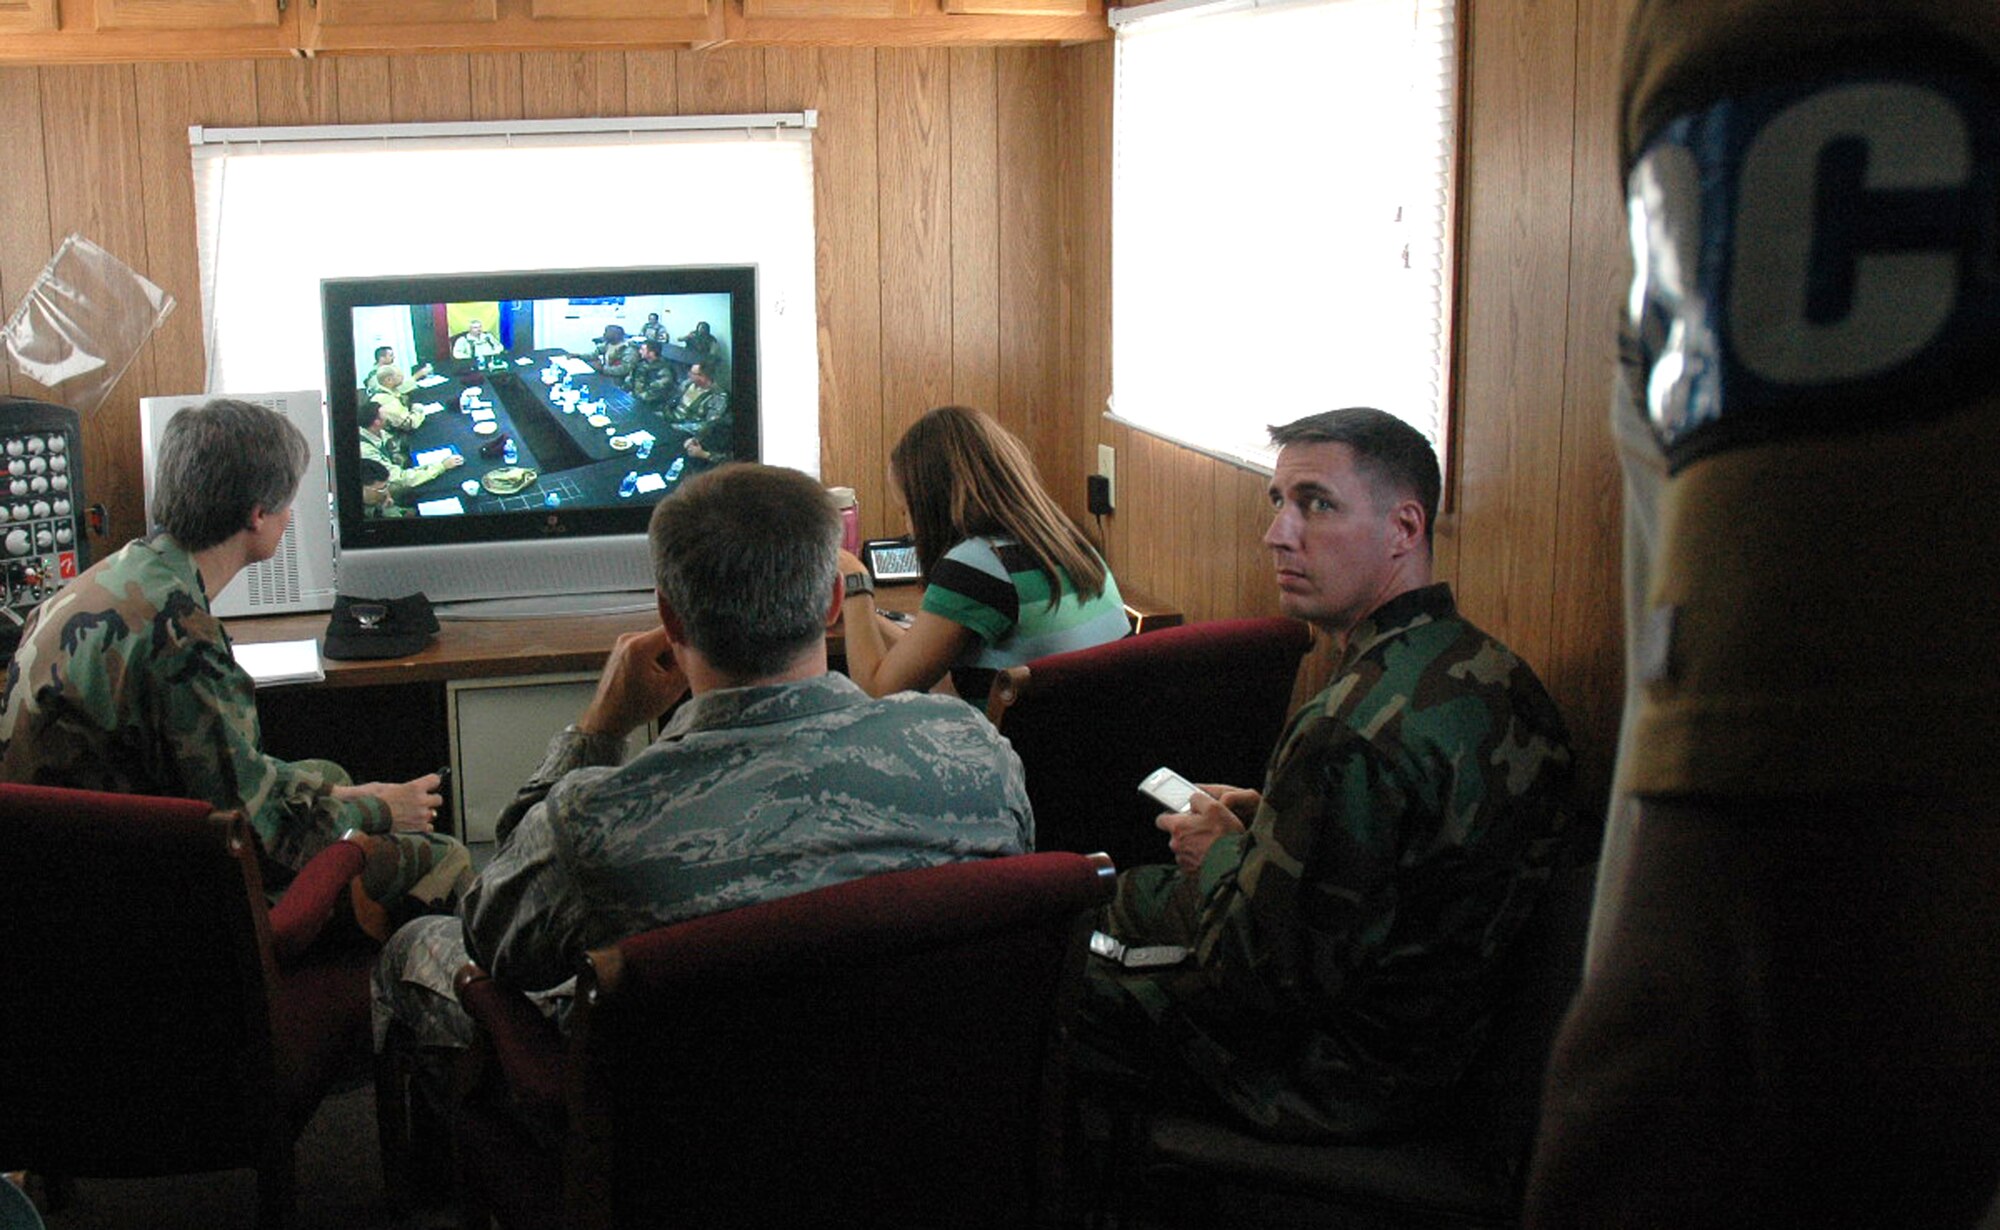 Exercise observer/controllers oversee a meeting between deployed Airmen from the "421st Air Expeditionary Group" and the host nation army of "Chimaera" as part of an event for Air Force Exercise Eagle Flag 08-5 at Naval Air Engineering Station Lakehurst.  Eagle Flag is operated by the U.S. Air Force Expeditionary Center's Expeditionary Operations School and 421st Combat Training Squadron at Fort Dix, N.J., and tests and trains Airmen in expeditionary combat support skills.  (U.S. Air Force Photo/Tech. Sgt. Scott T. Sturkol)